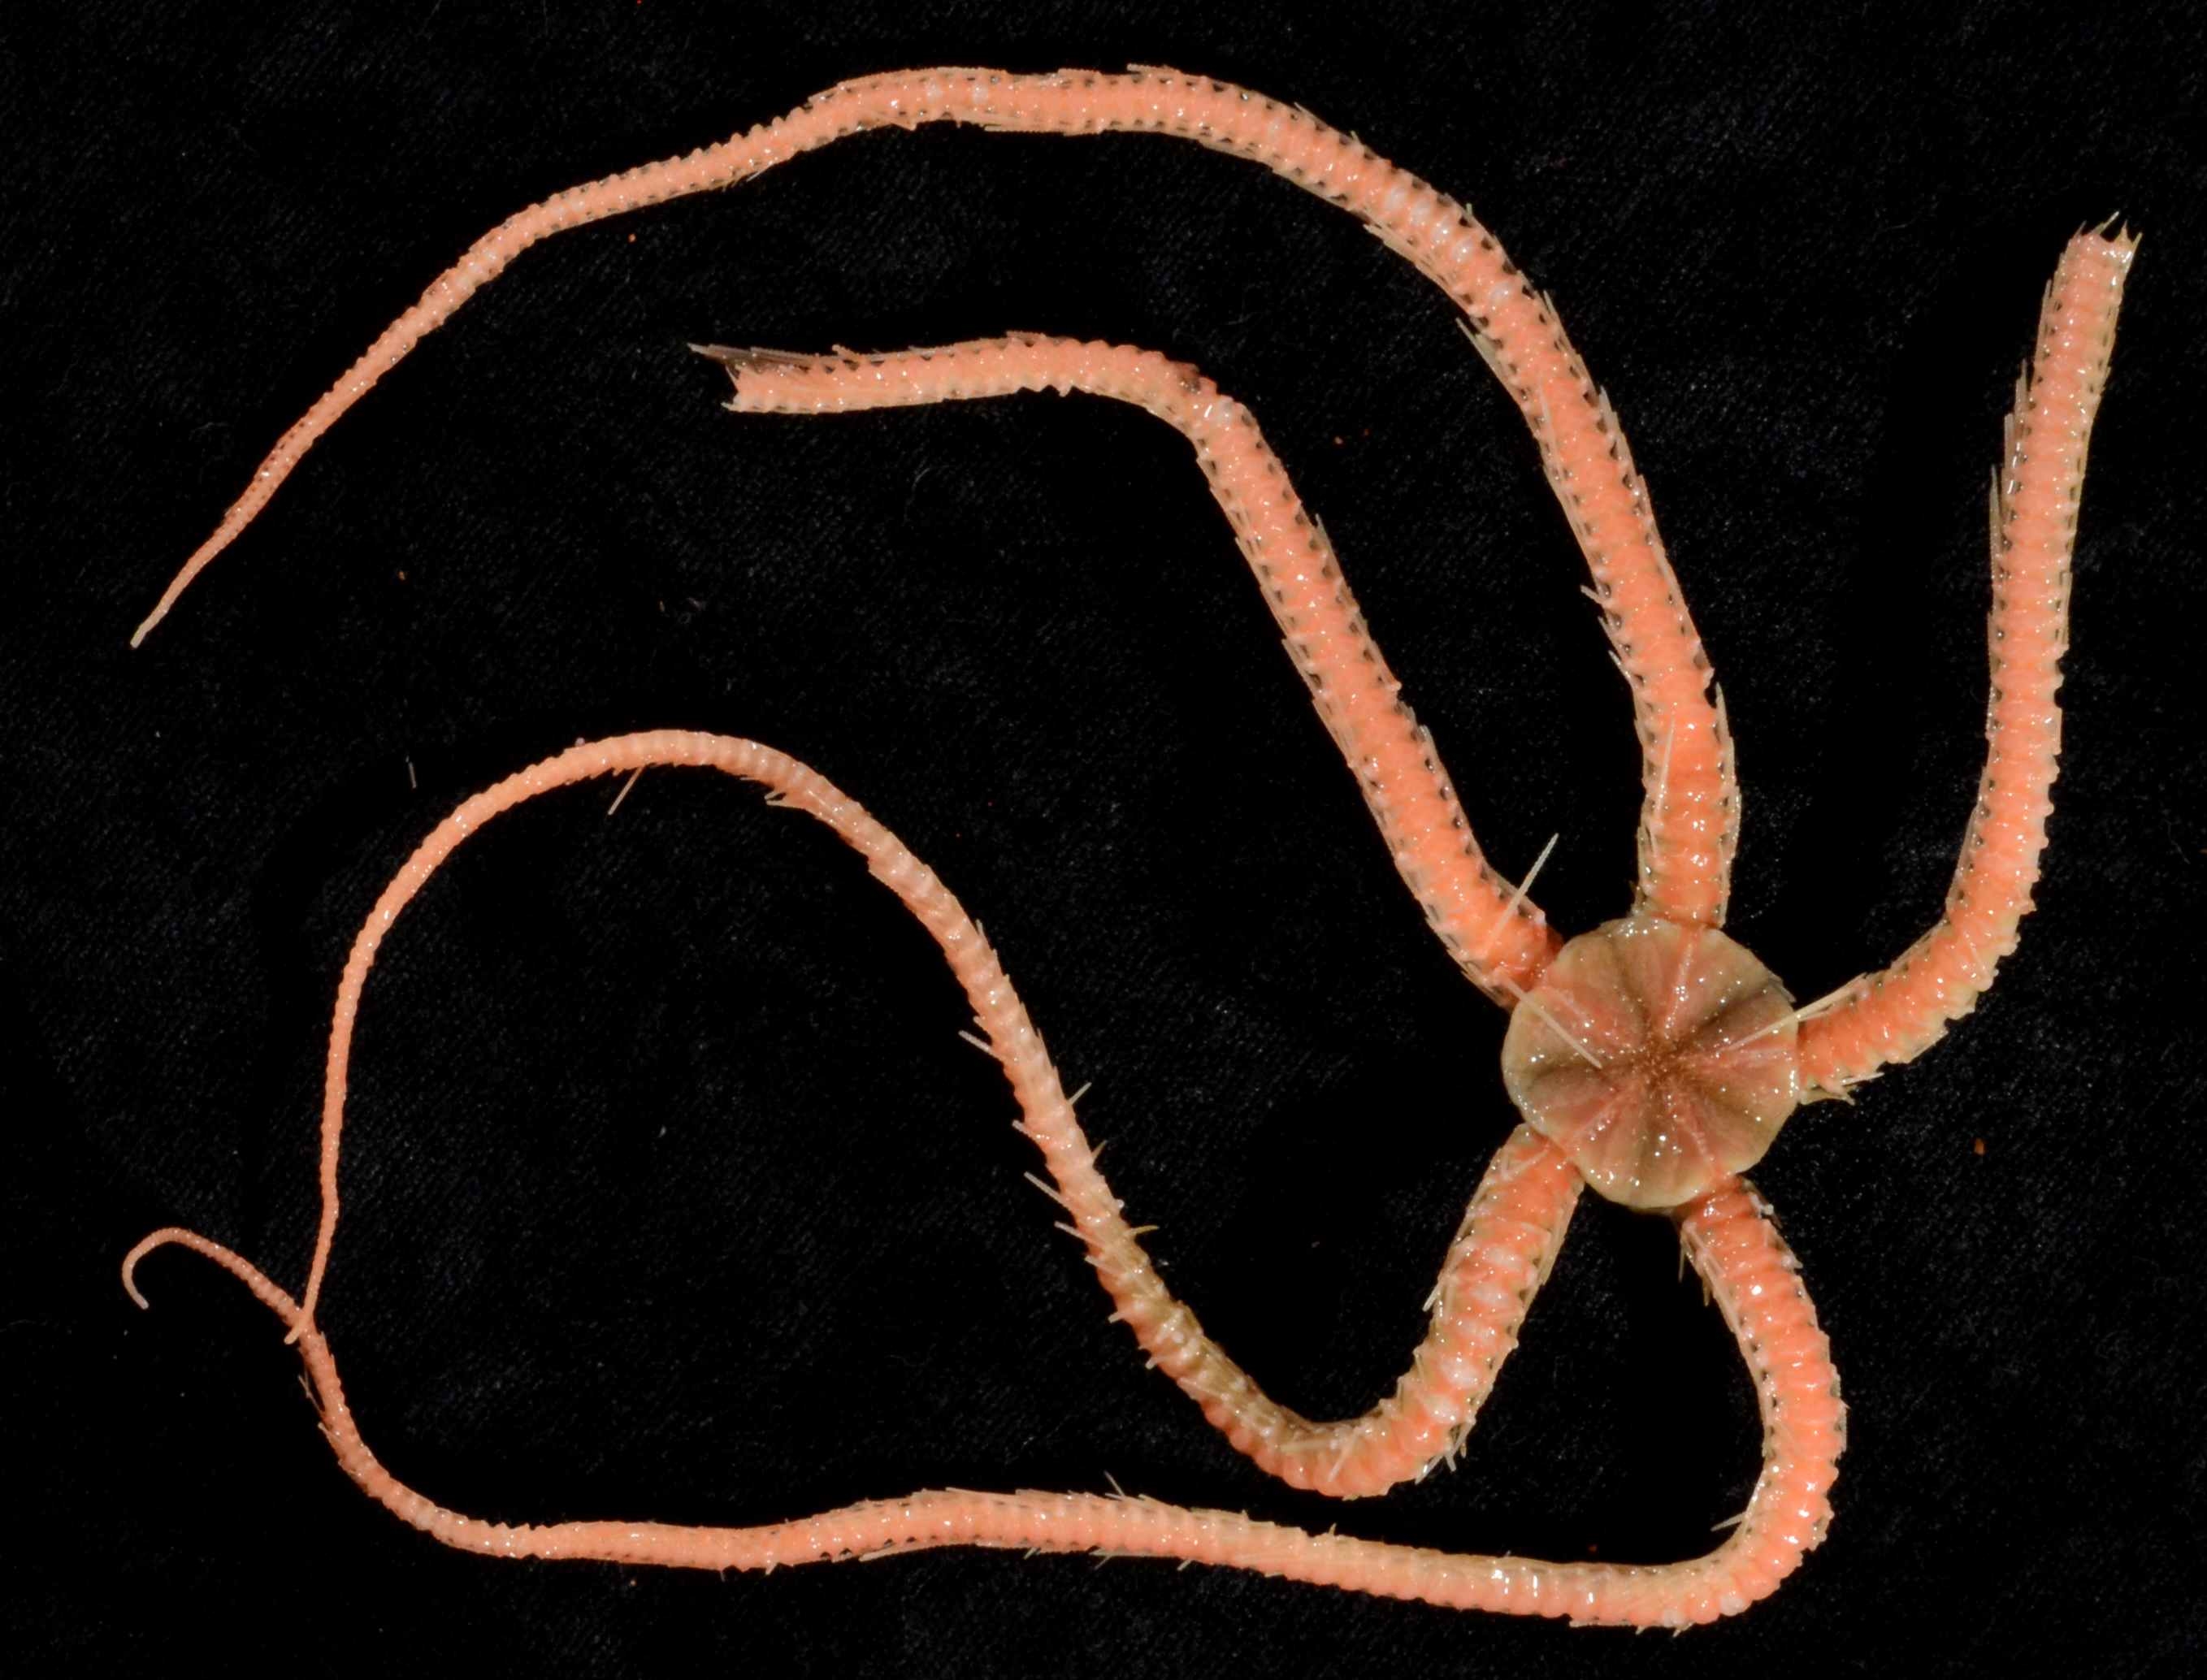 Ophiocamax image